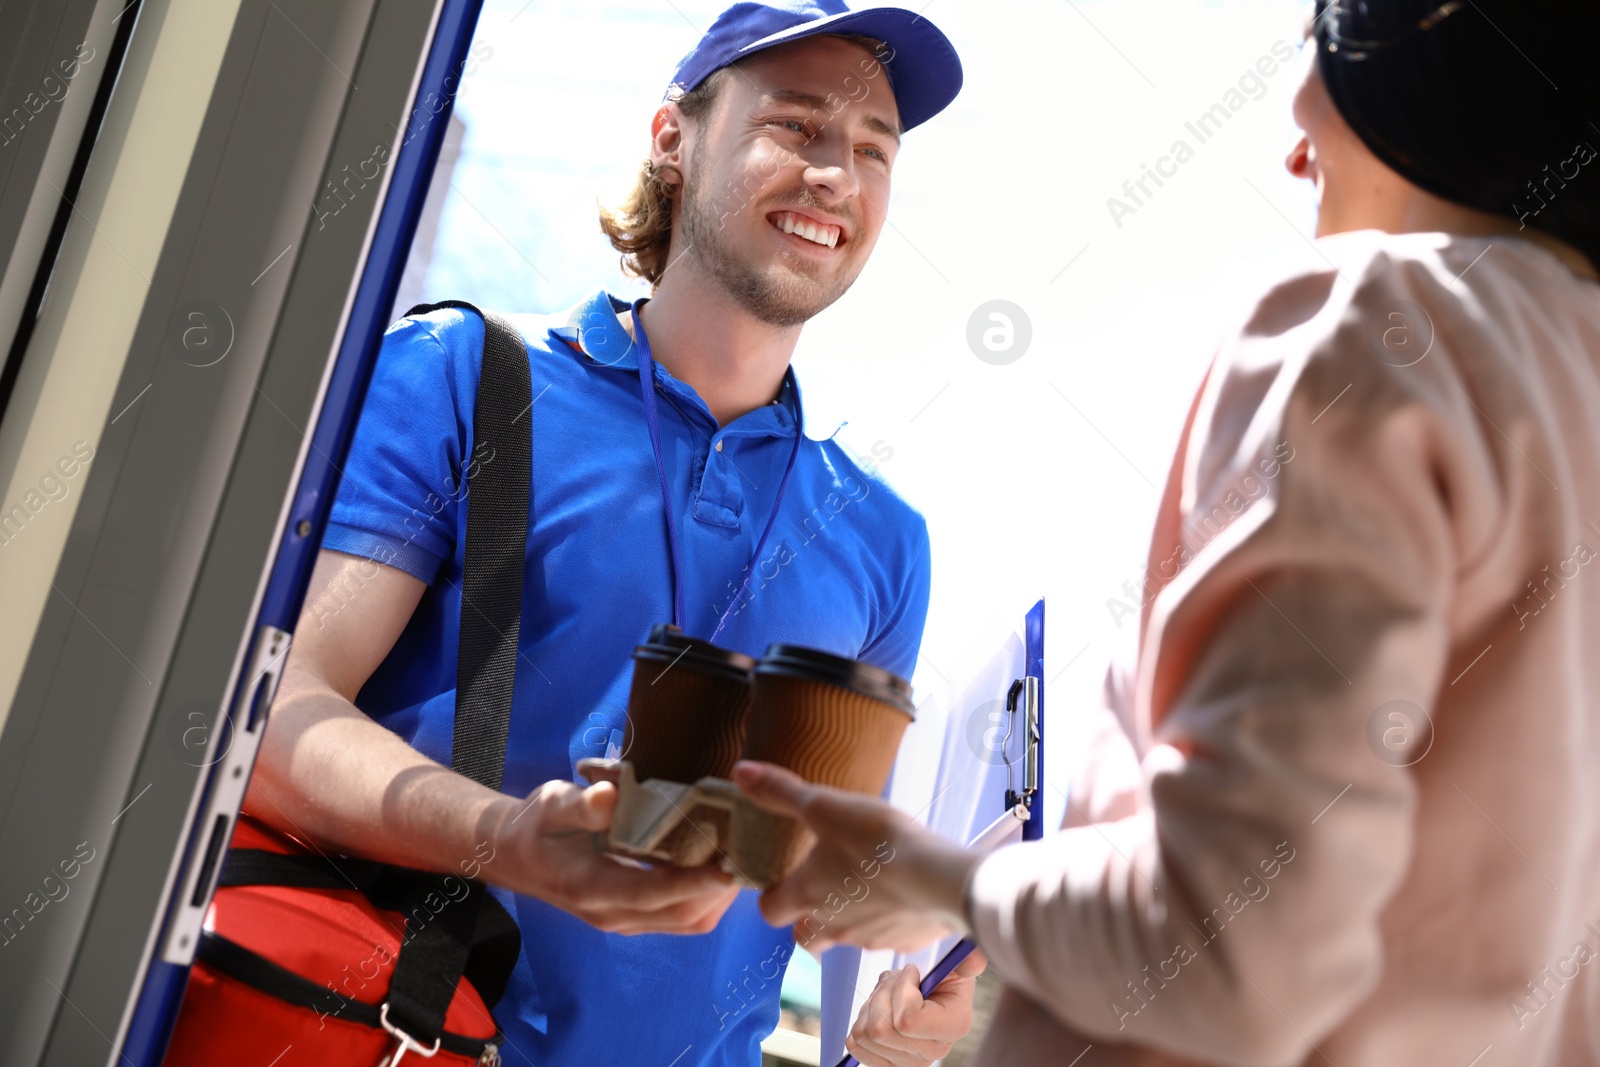 Photo of Woman receiving order from courier at door. Food delivery service